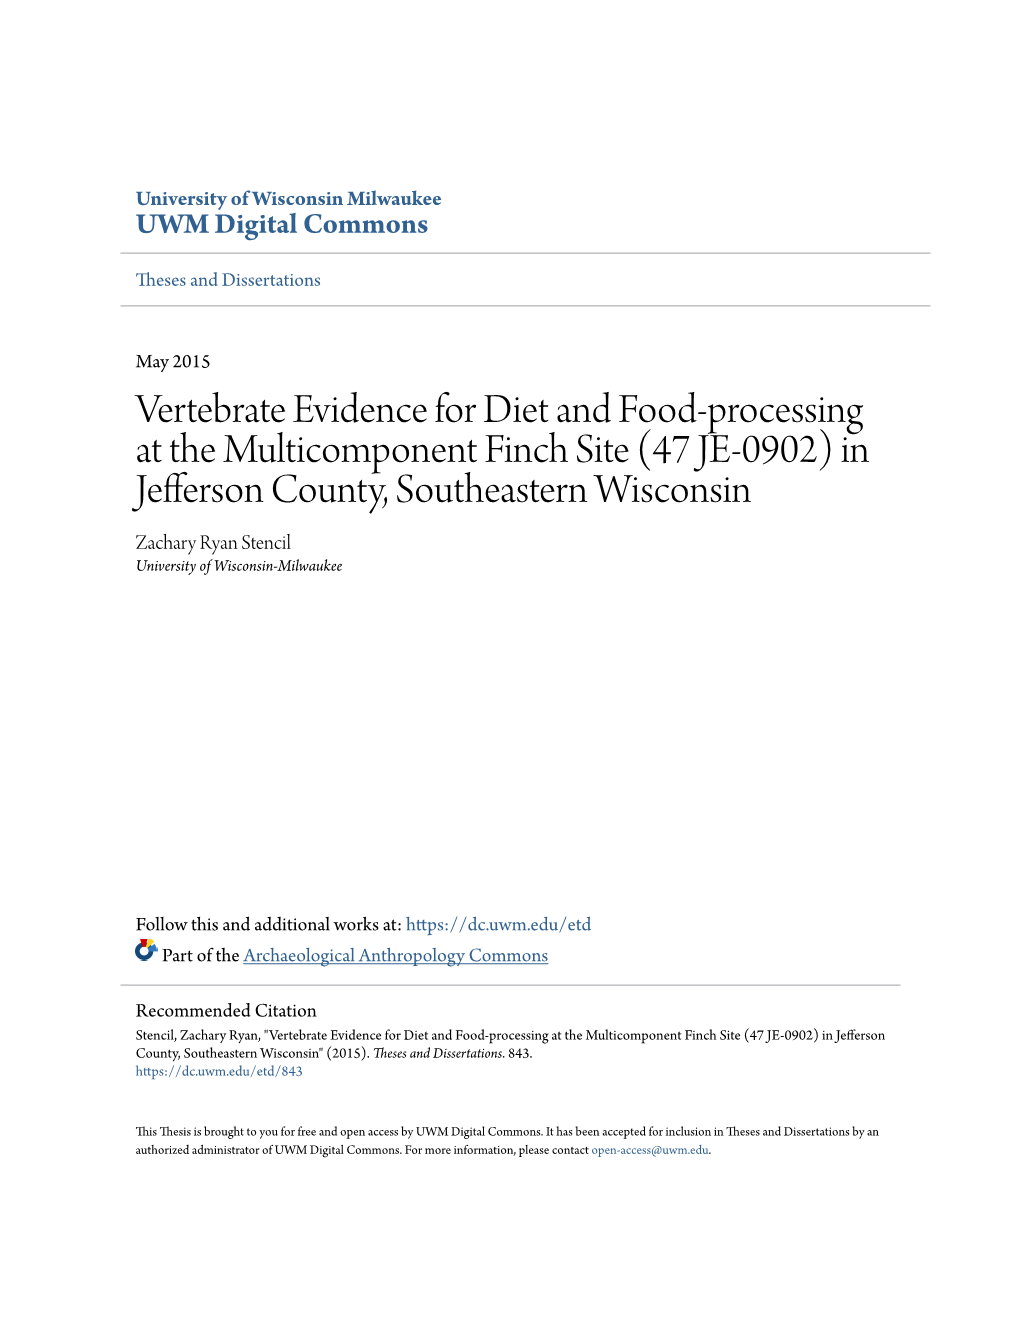 Vertebrate Evidence for Diet and Food